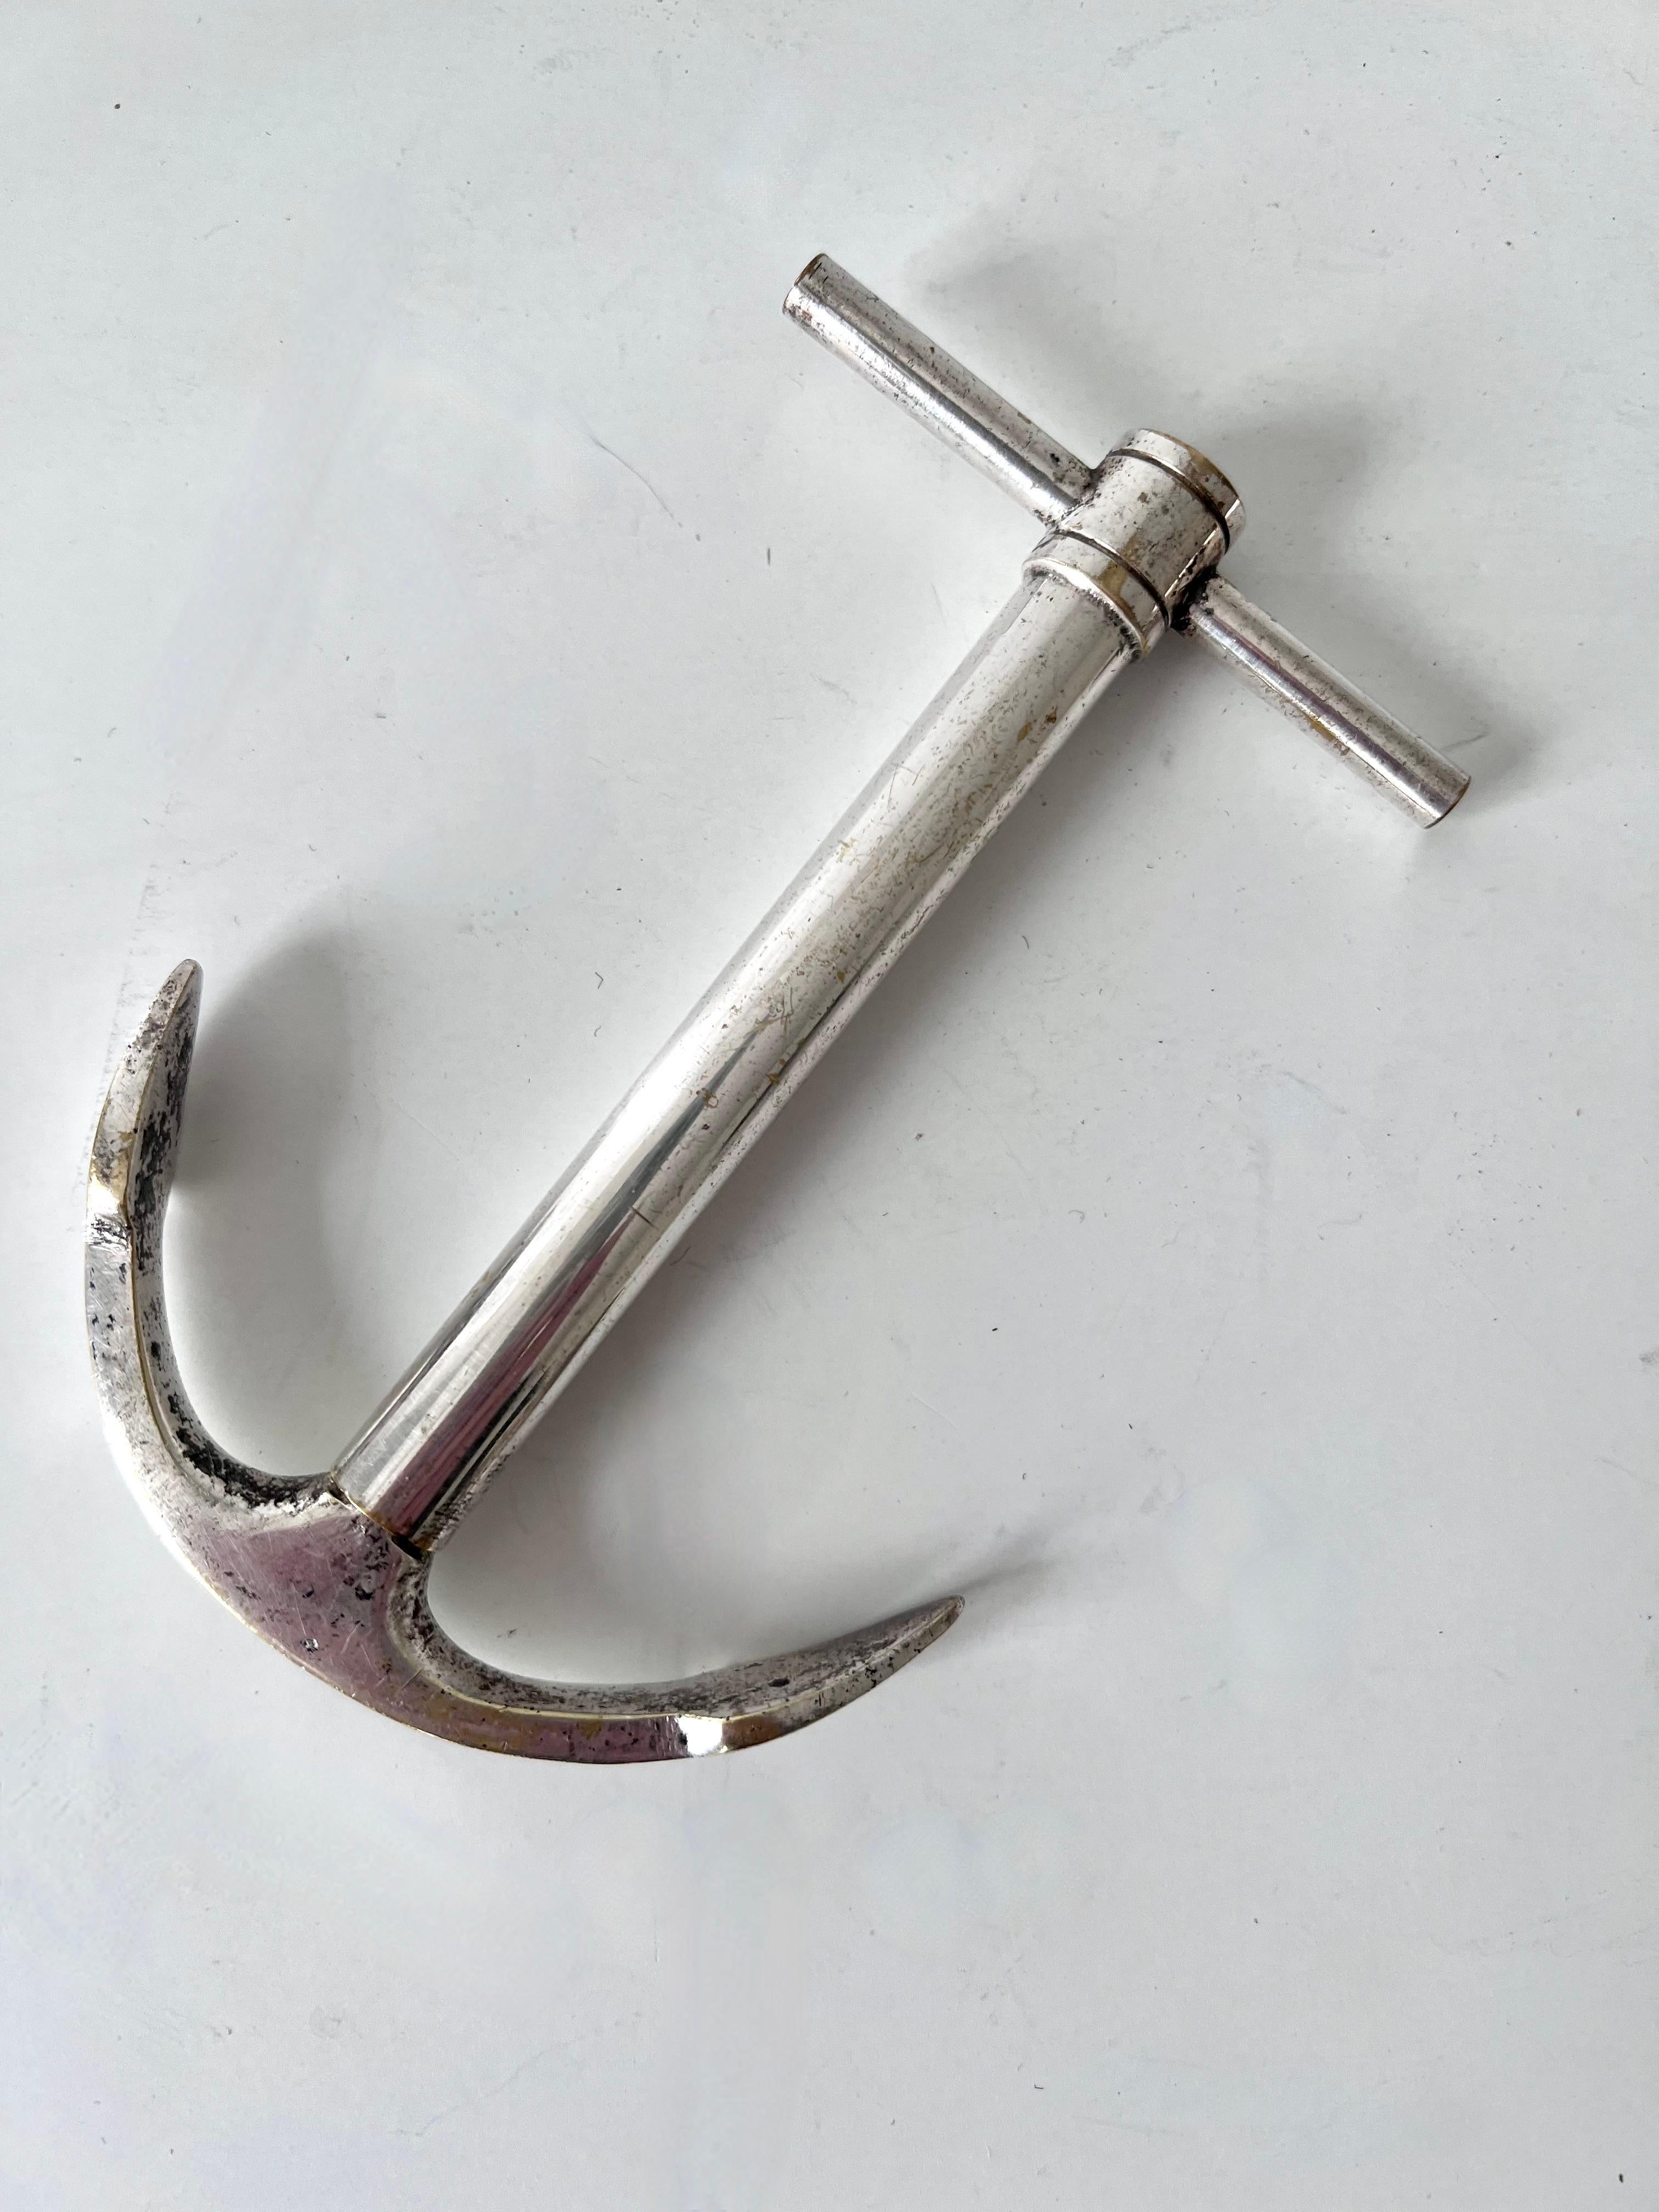 A unique bottle opener from Paris France, the piece is an anchor when closed, but when pulled apart becomes a corkscrew. A compliment to many bars, especially those near or with a seaside theme.